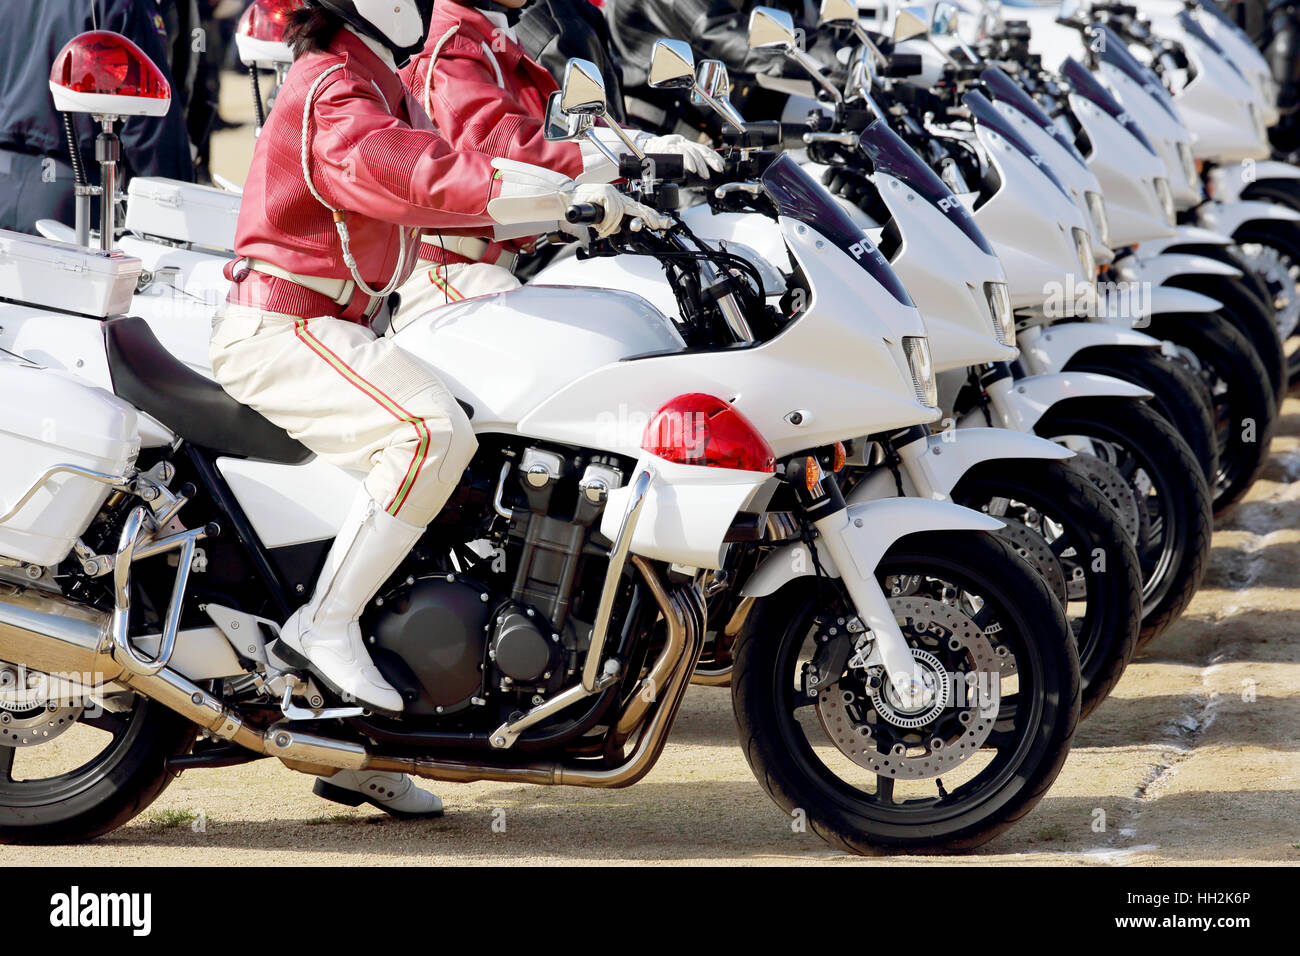 Row of Japanese police woman on motorcycle Stock Photo - Alamy